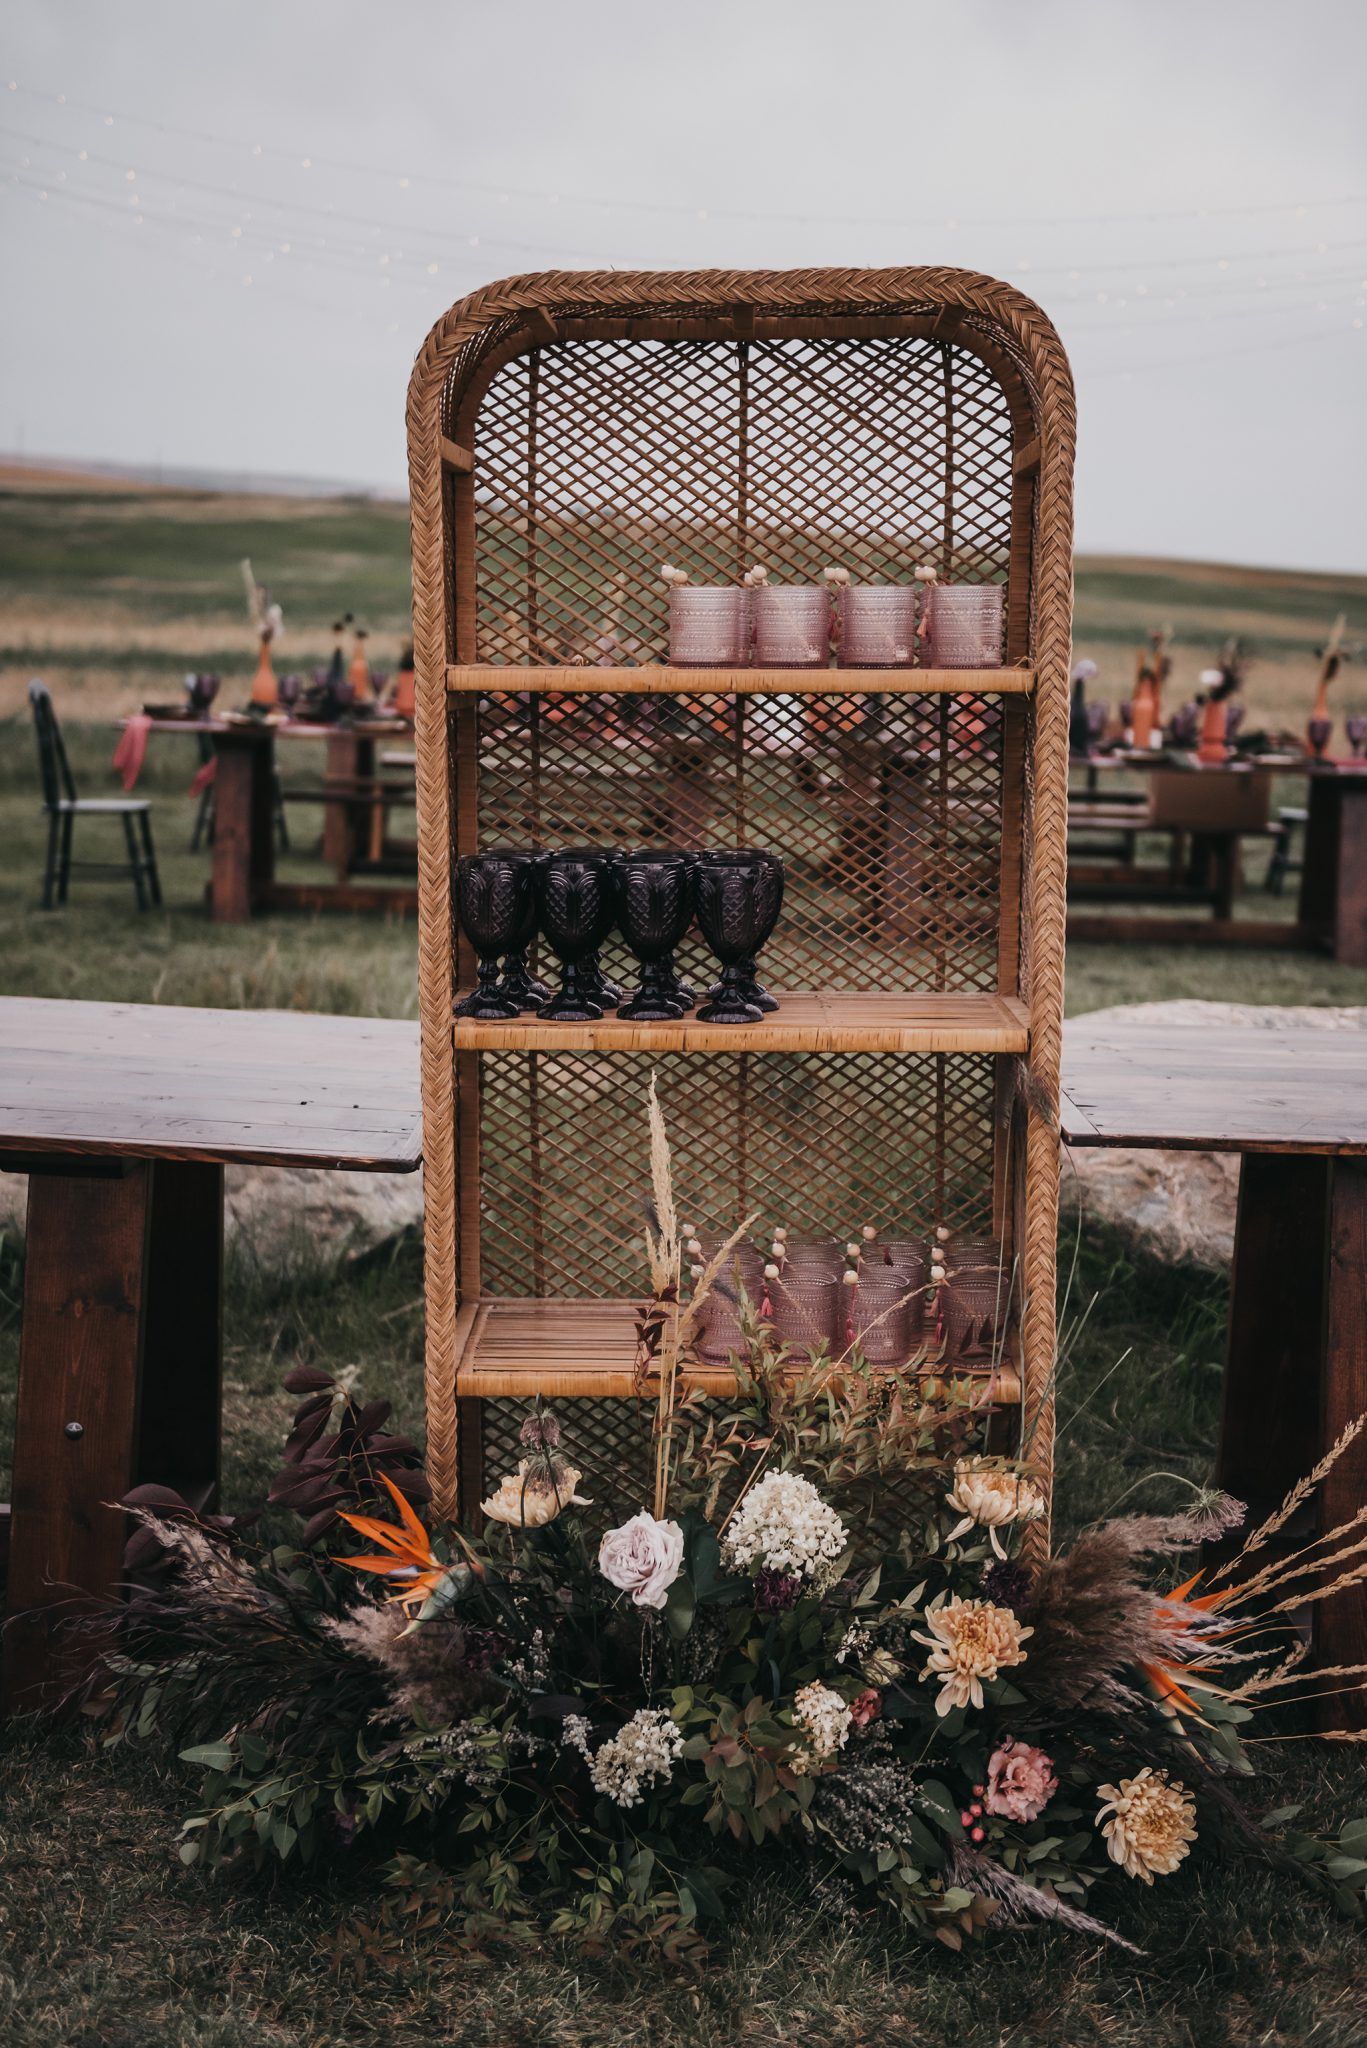 Real Wedding - Countryside Nuptials & Moroccan Styled Reception - featured on Junebug and Bronte Bride, moroccan decor and styling, bohemian style